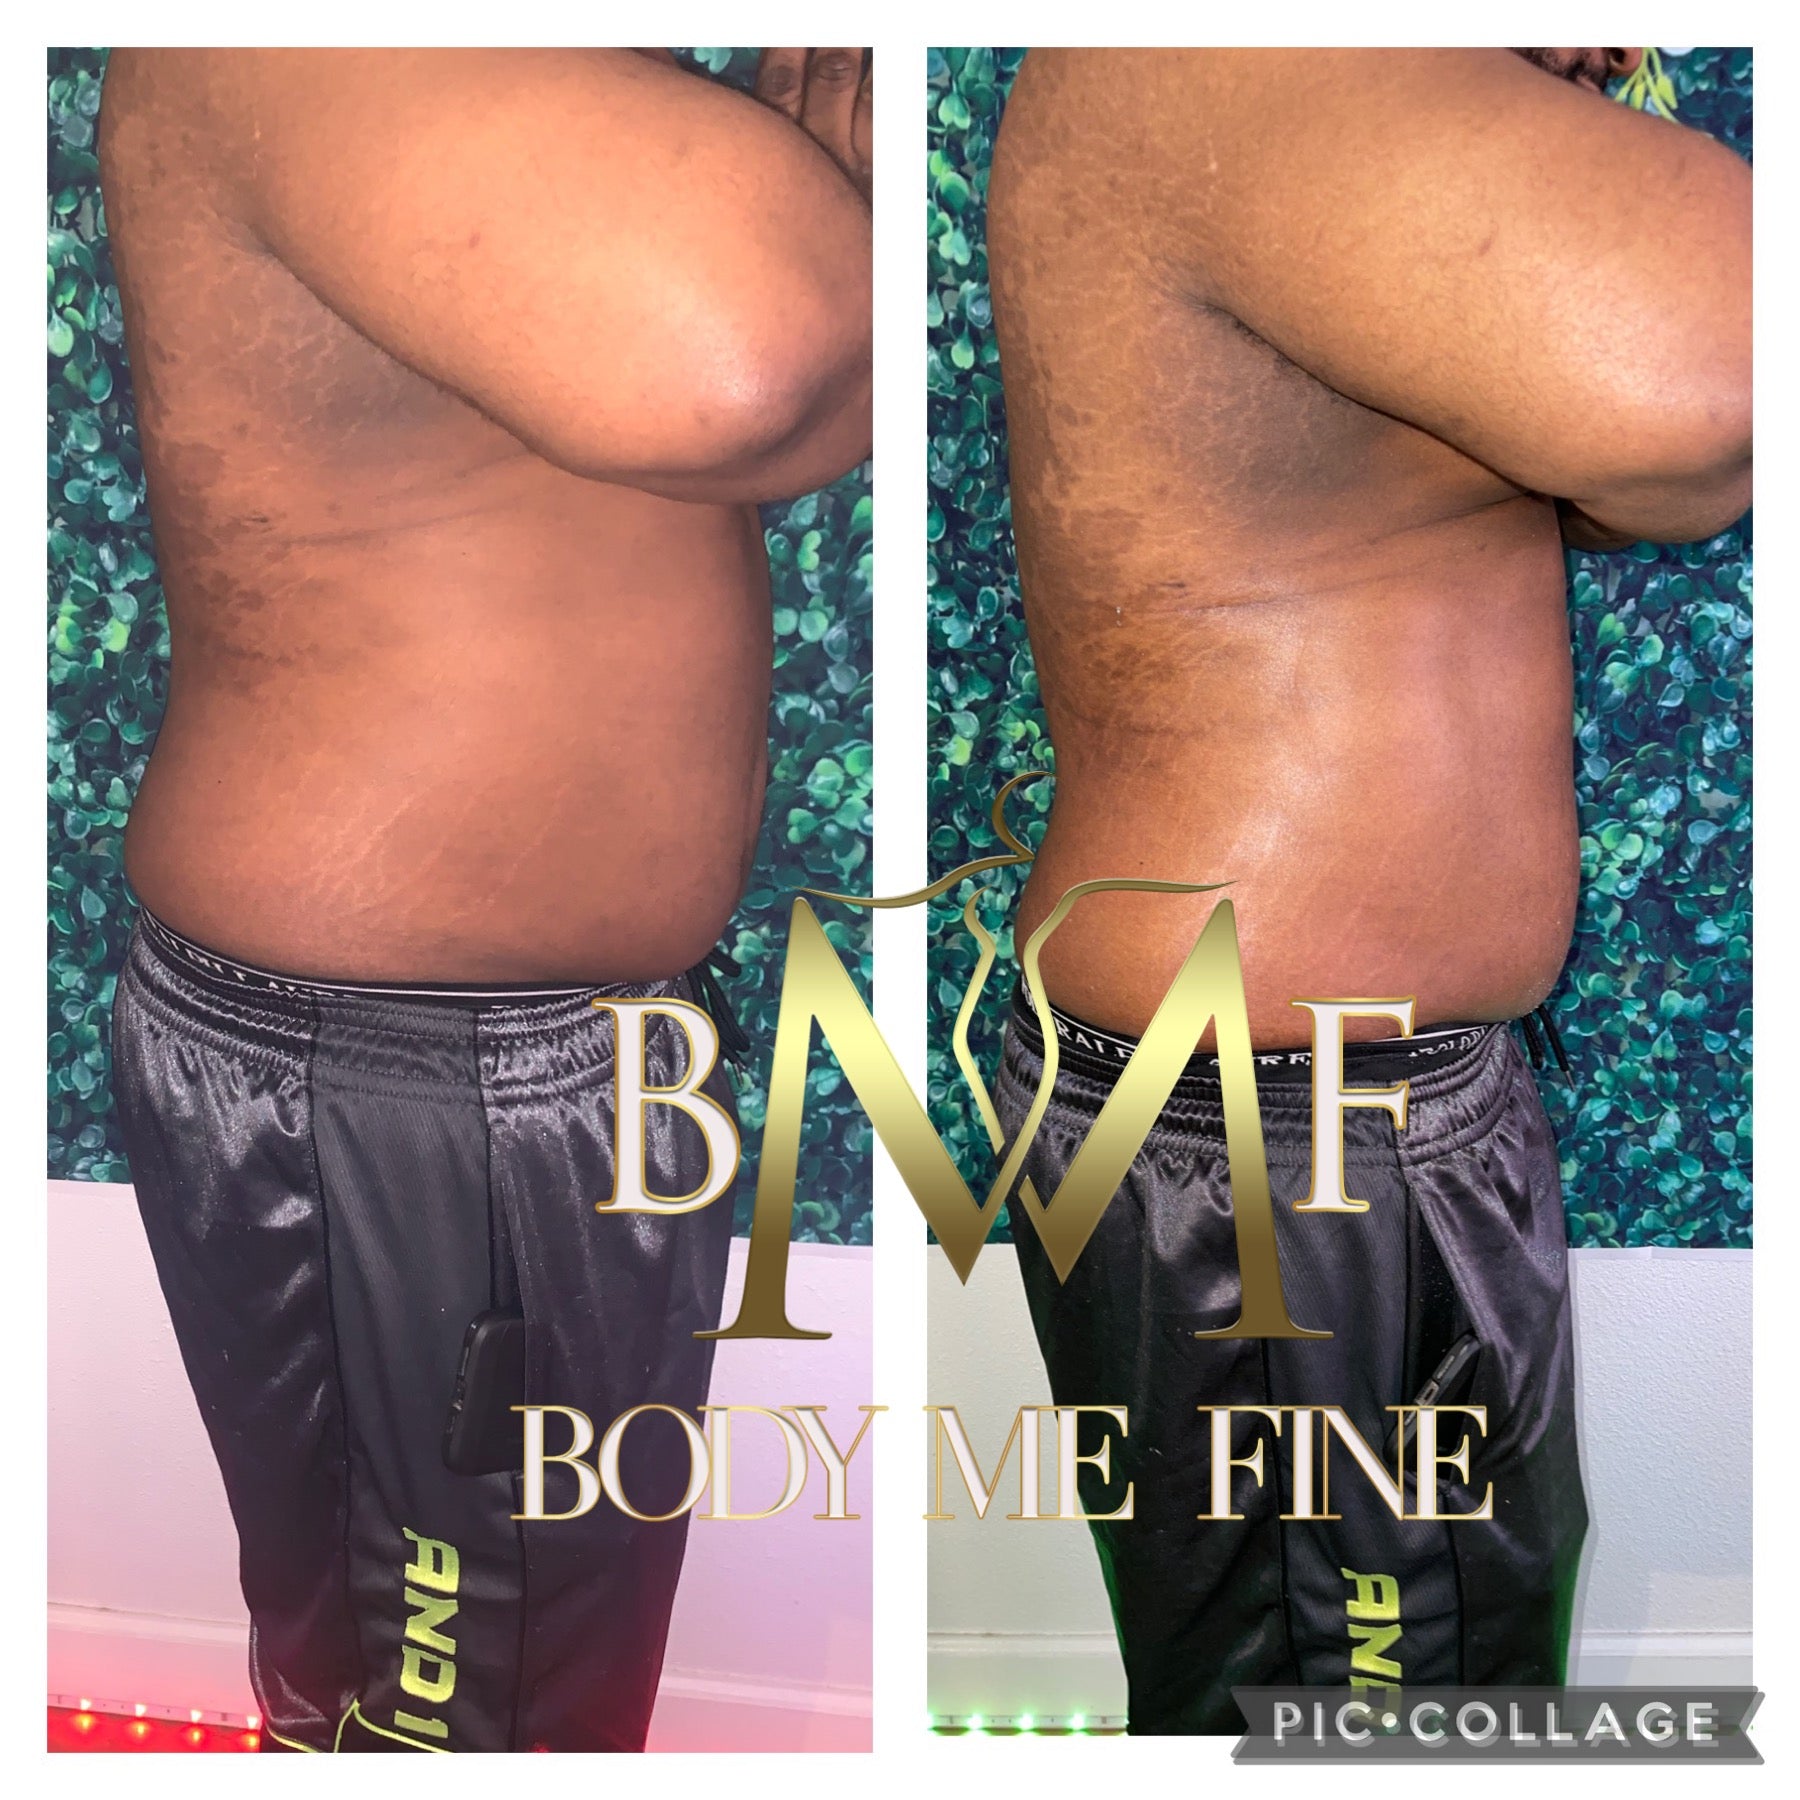 Body Contouring/ Sculpting Package – bodymefine